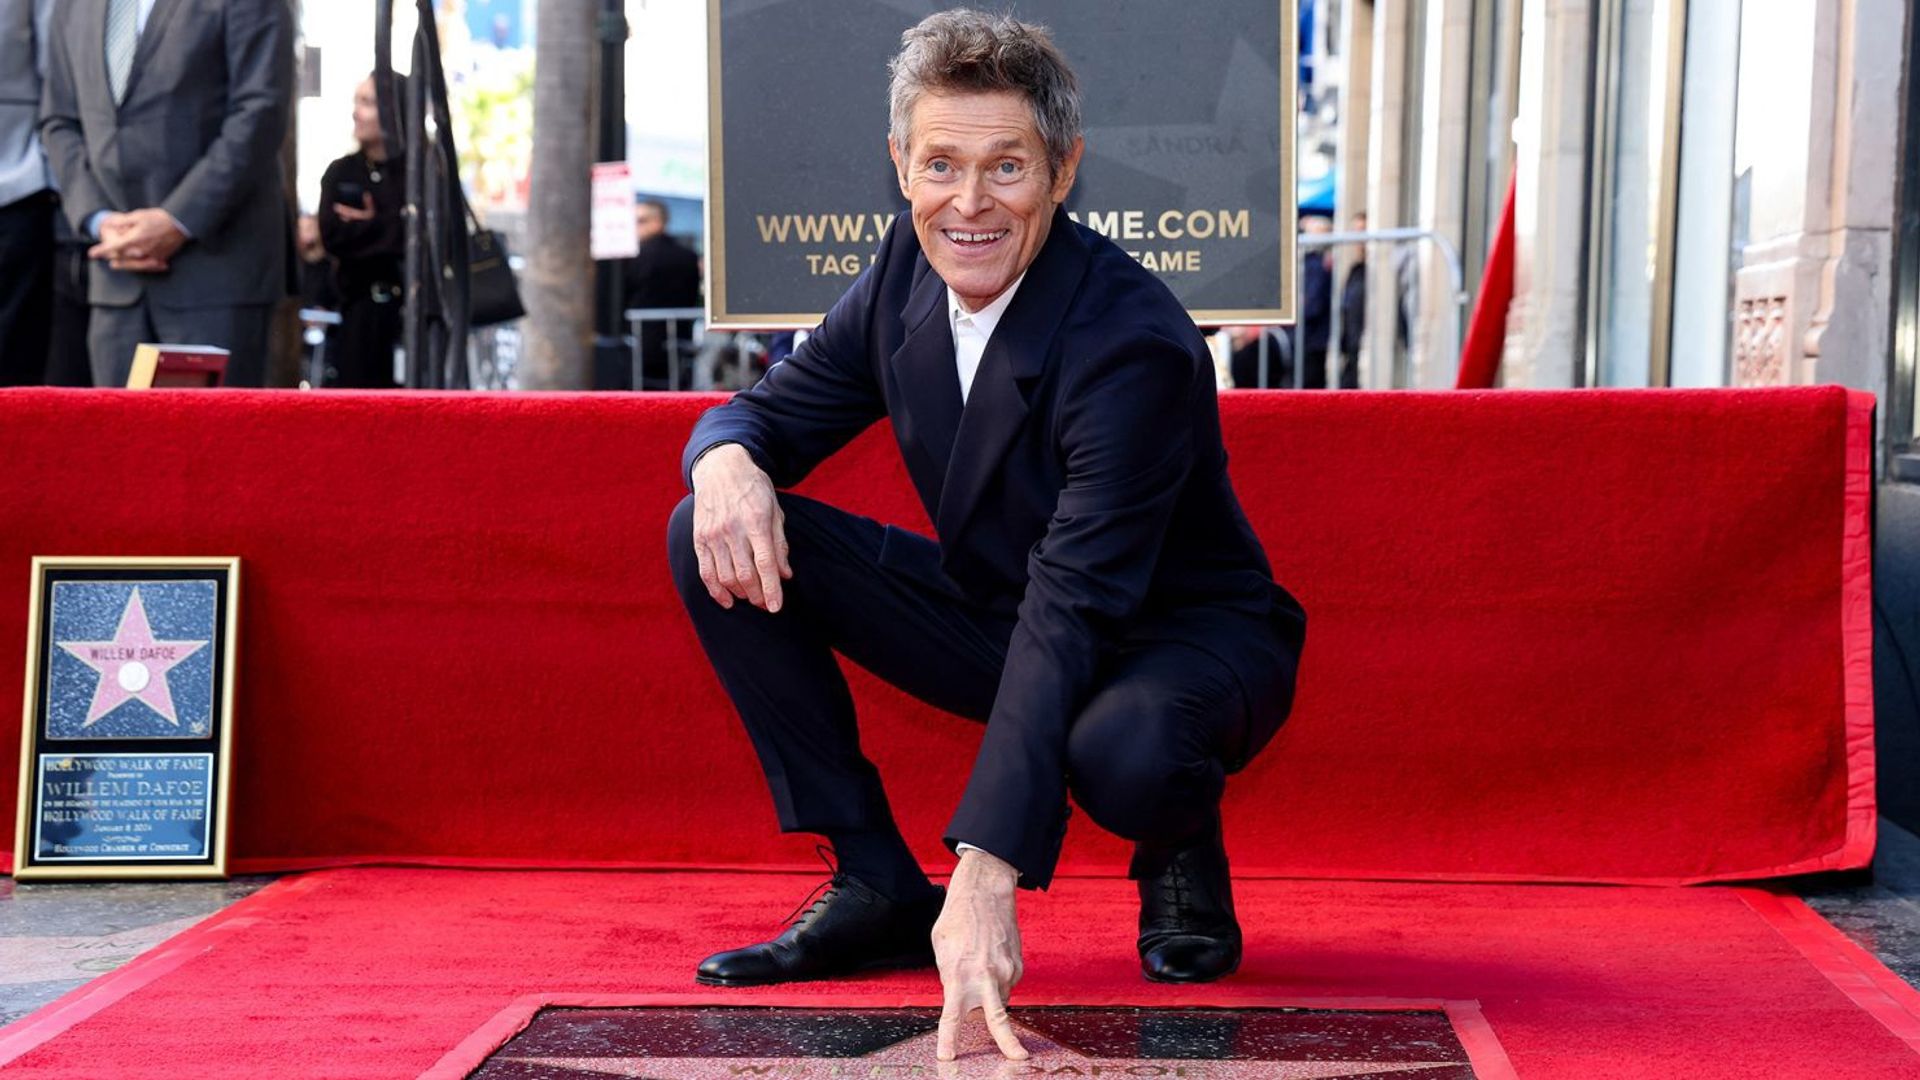 Willem Dafoe and his star on the Walk of Fame